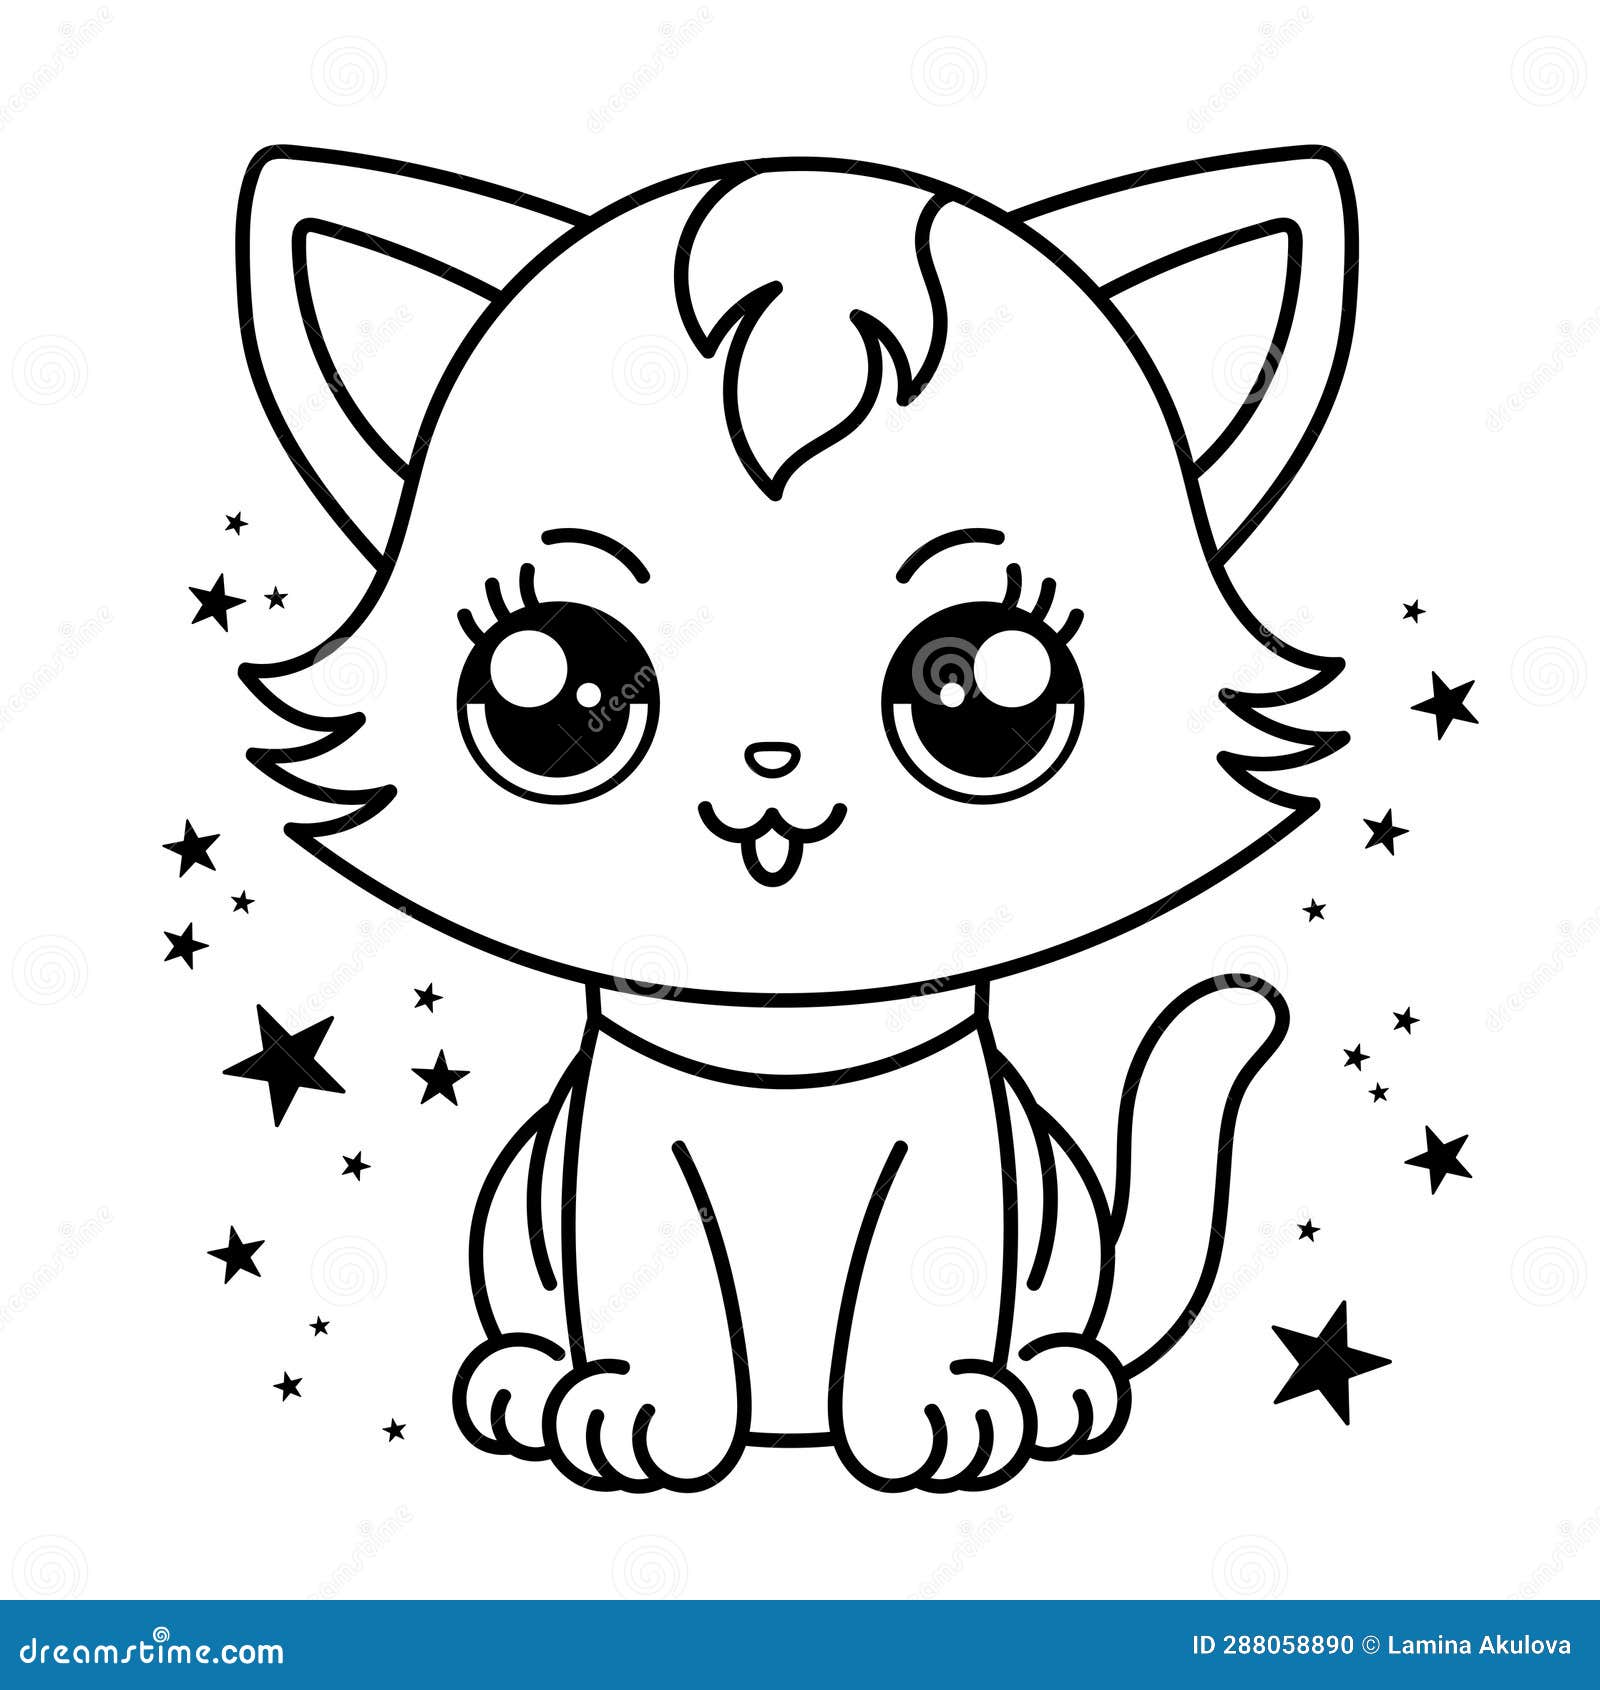 Cute Cat Coloring Page for Kids. Cartoon Fluffy Cat Illustration Stock ...